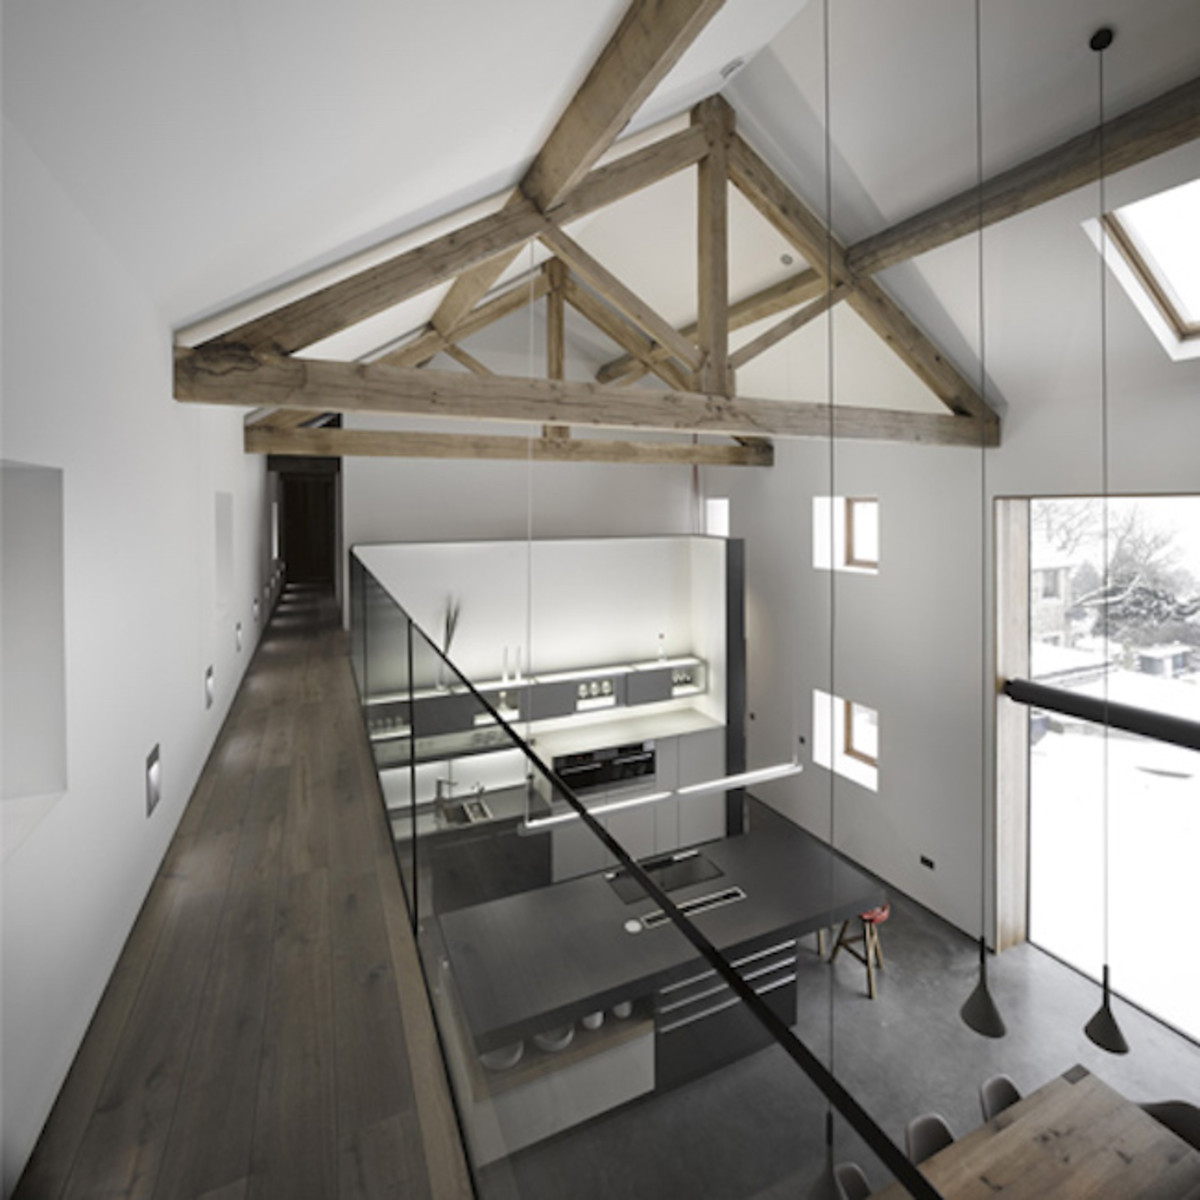 Snook Architects